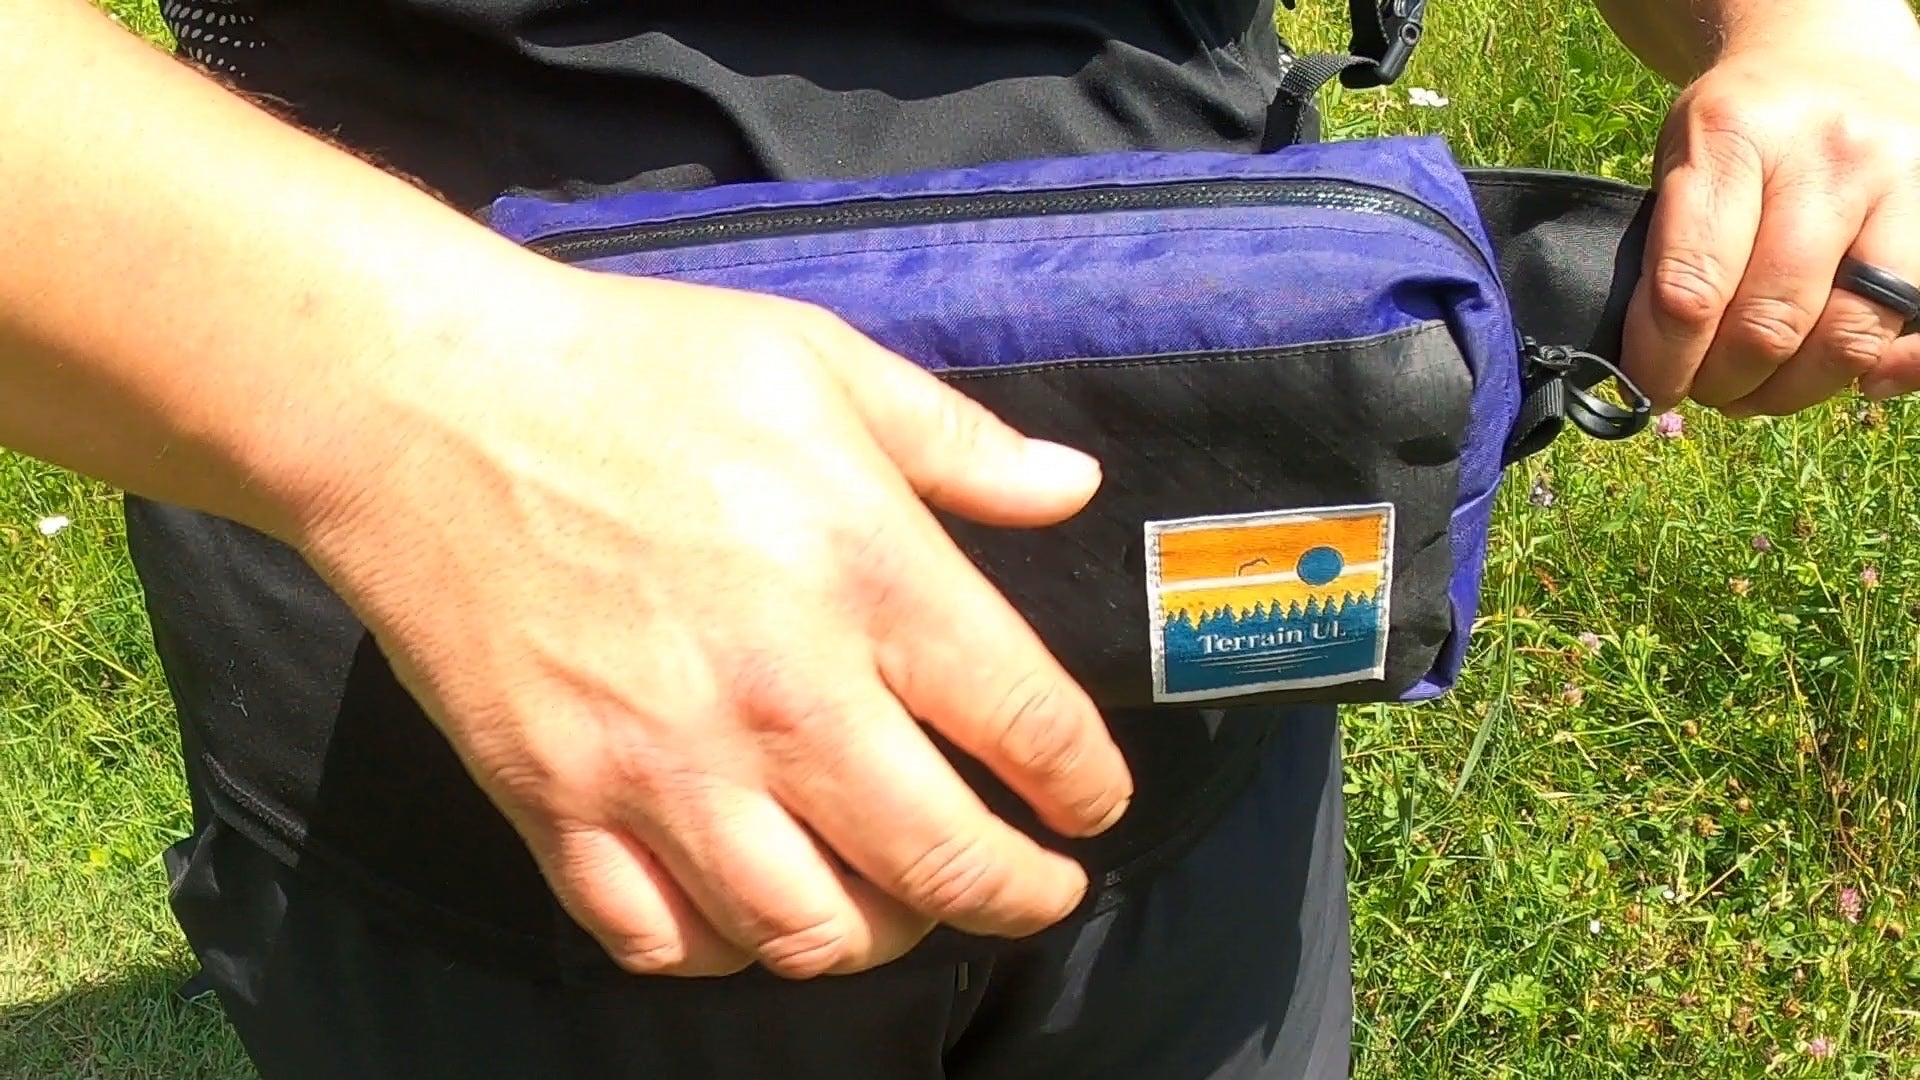 Load video: Dettach fanny pack buckles from hip belt and attach buckles to Free Range backpack and tighten.